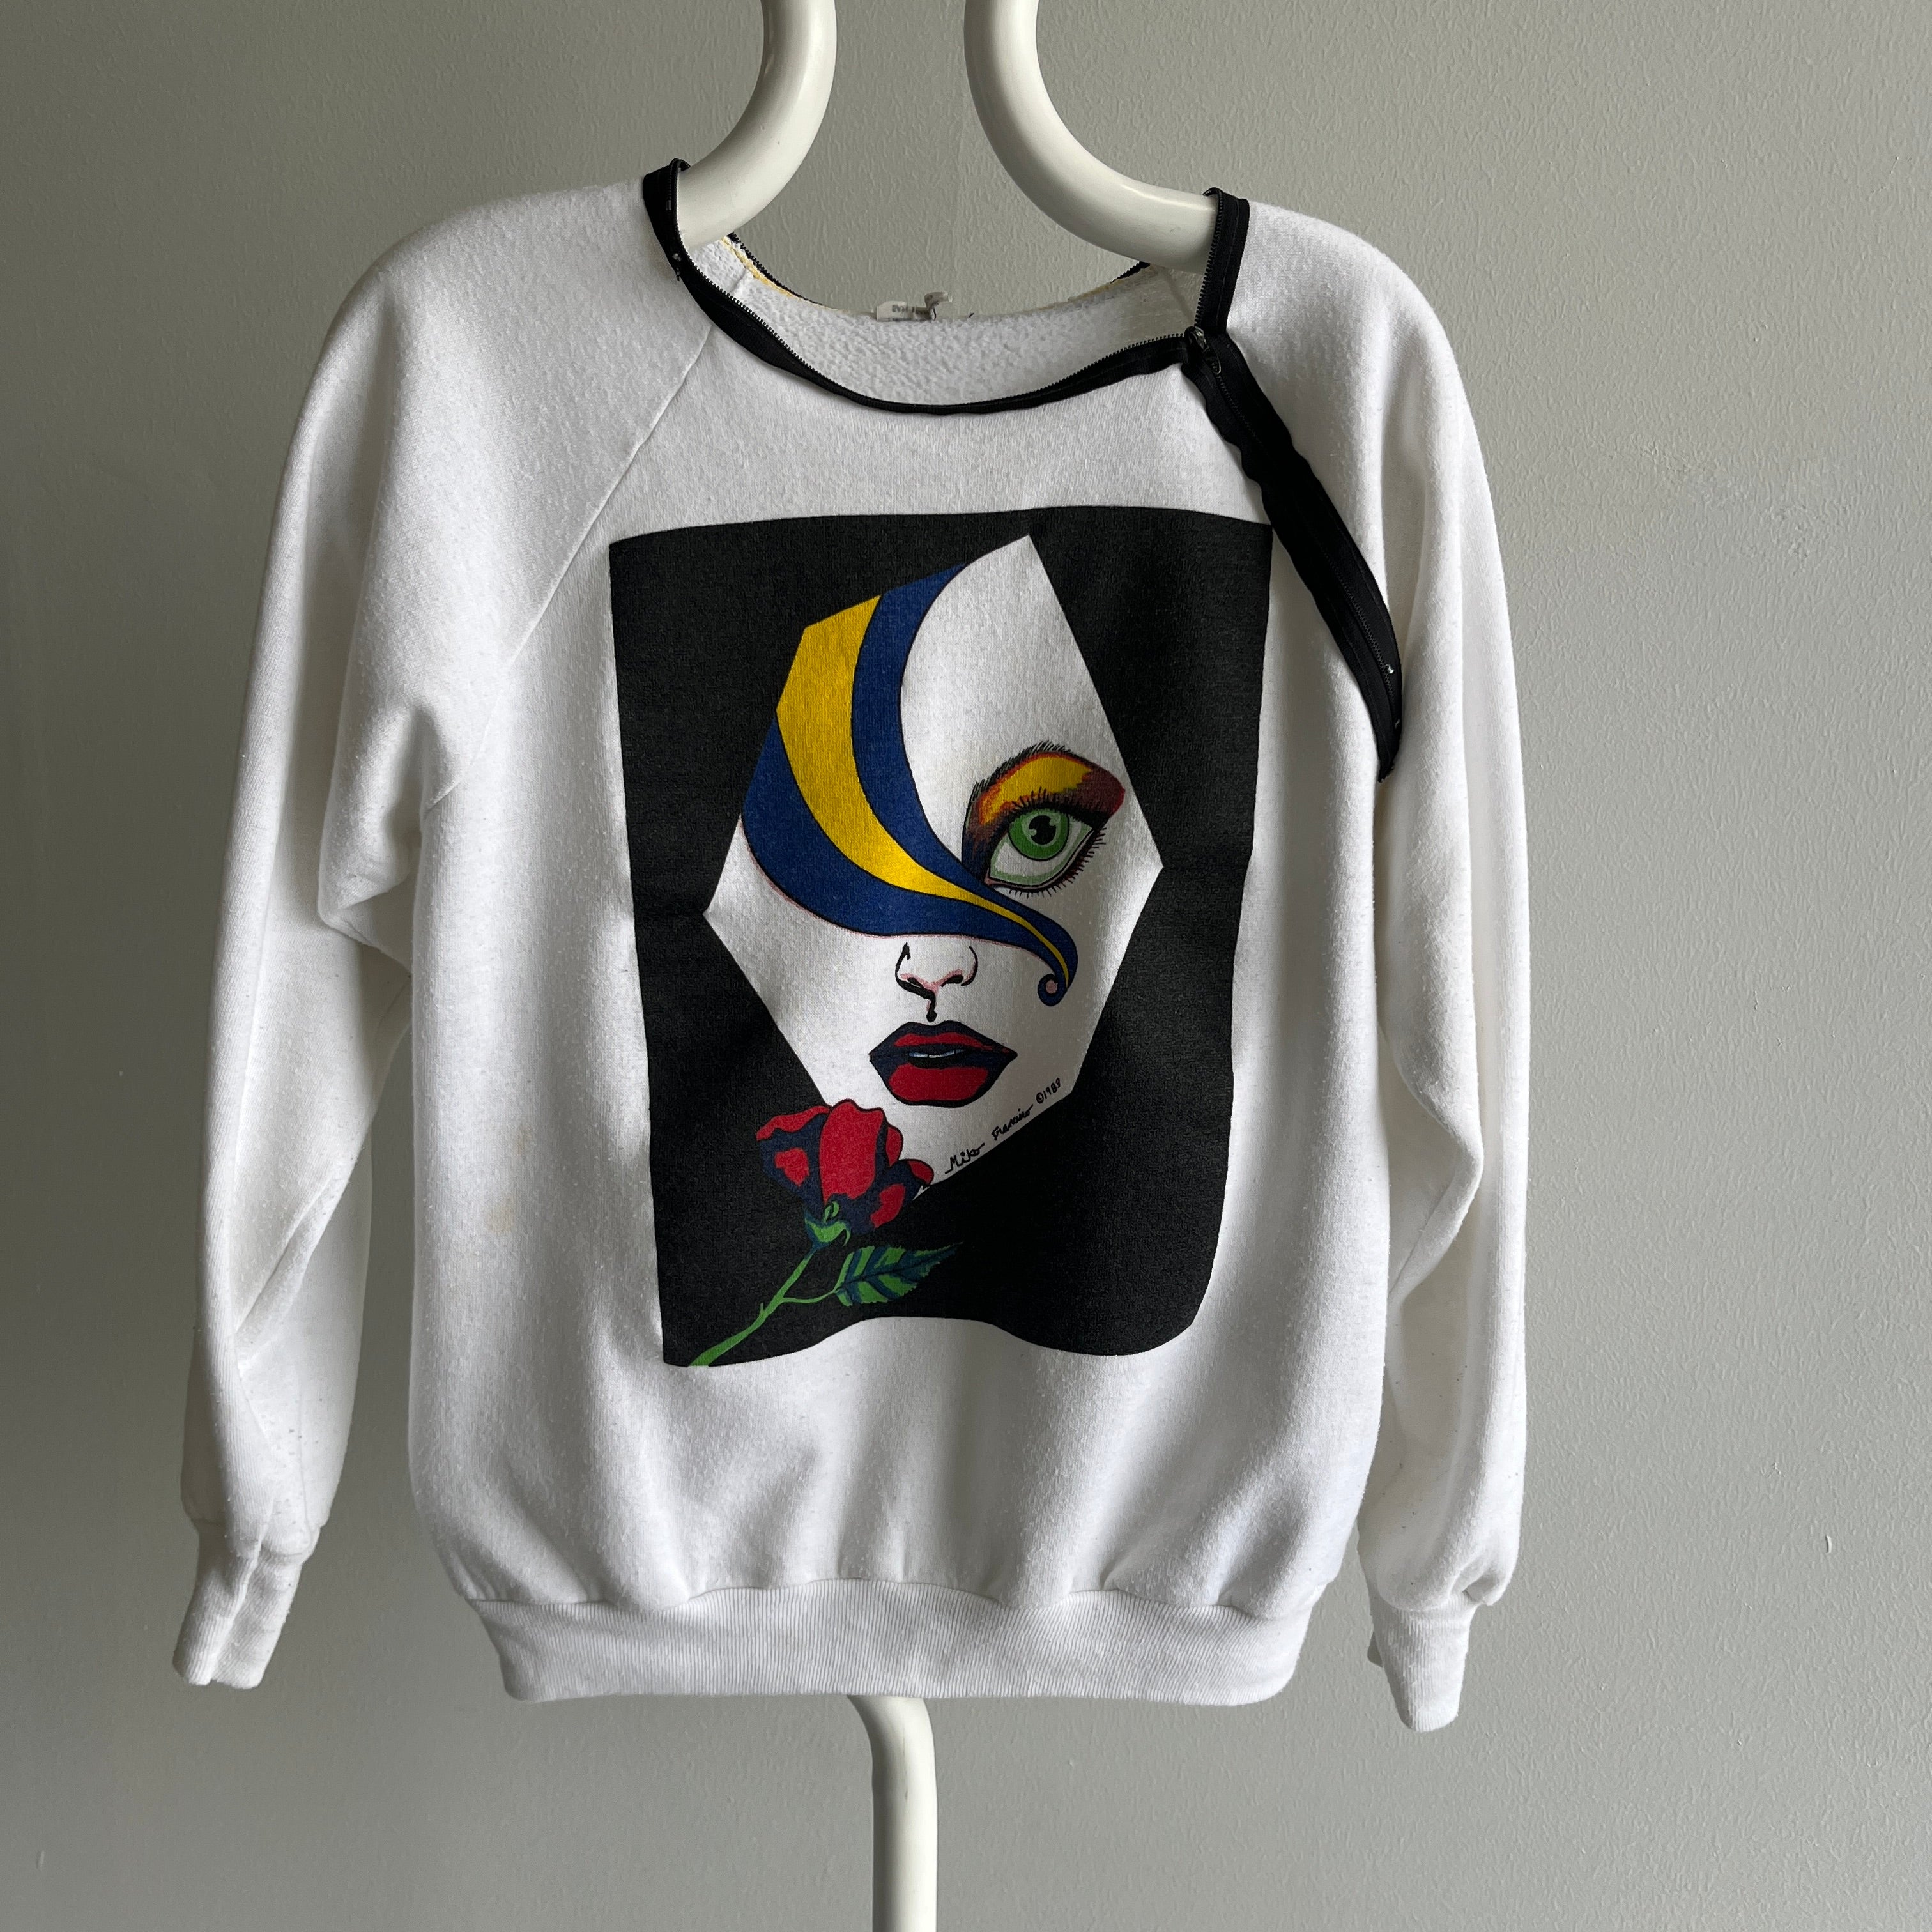 1989 Very Unique WOW, Weird and Maybe Wonderful Depending On Who You Ask - Sweatshirt with a Zipper Collar